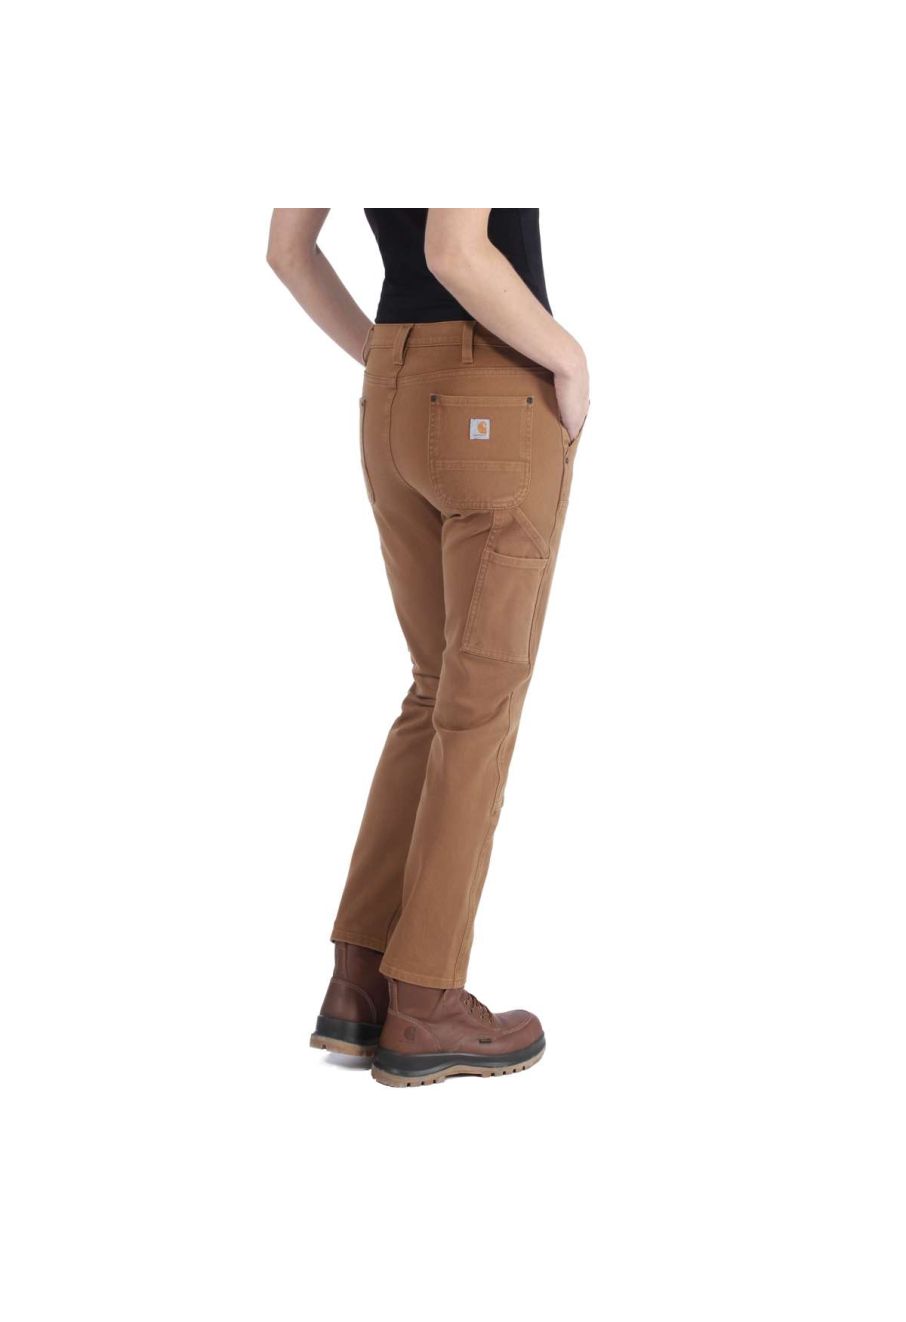 Carhartt Stretch Twill Double Front Trousers (104296)